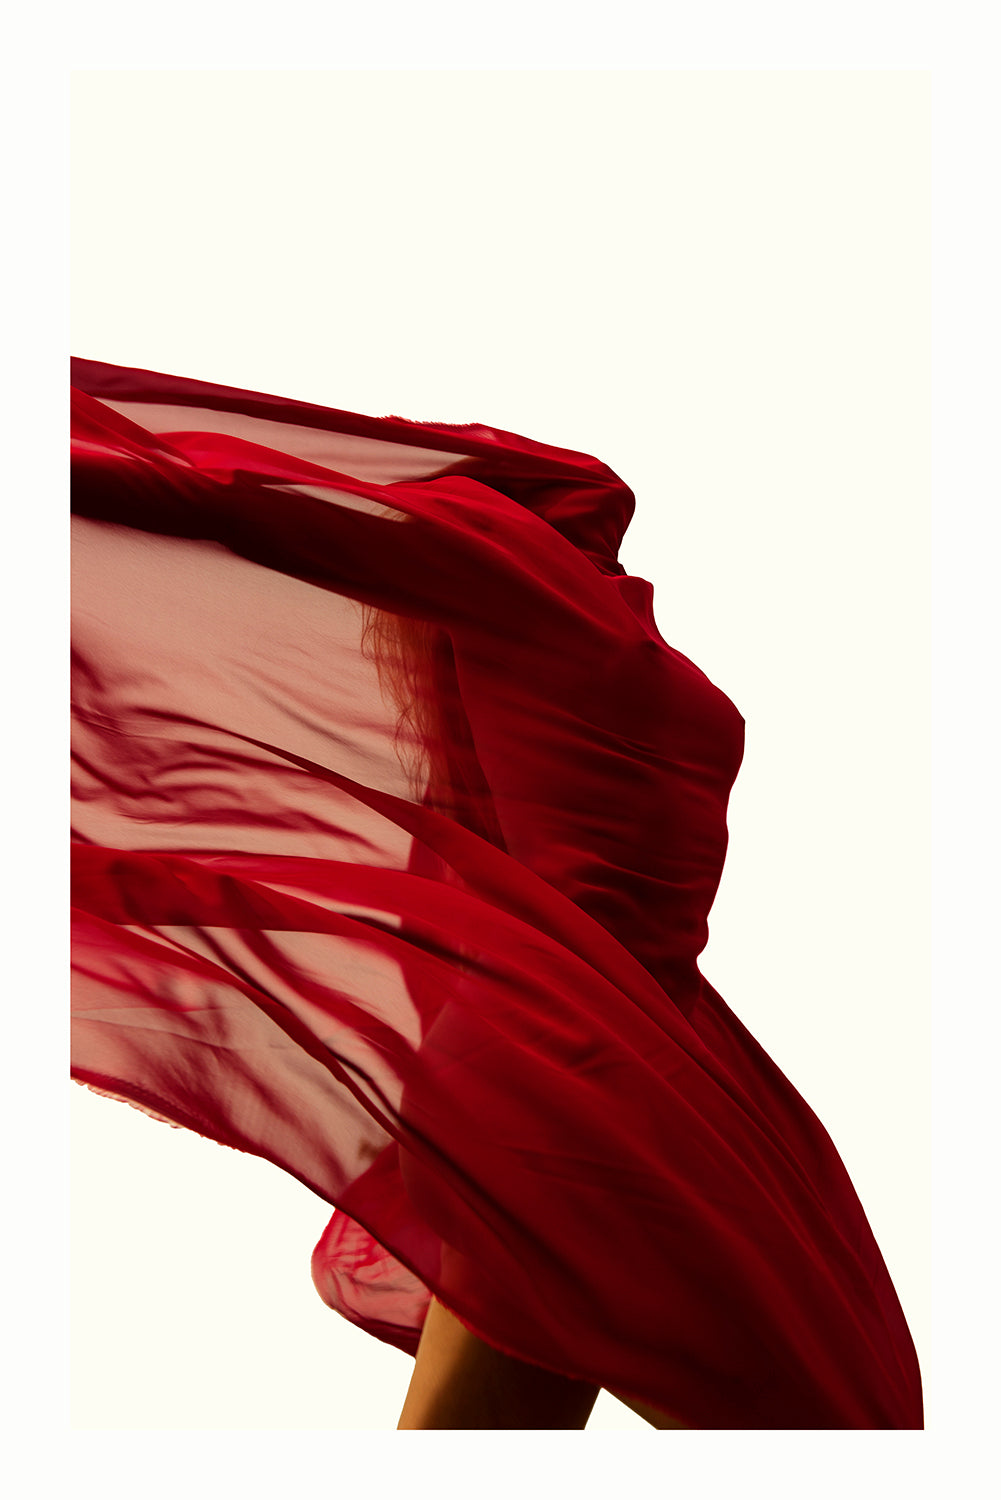 The Flow - limited Red Series - photography